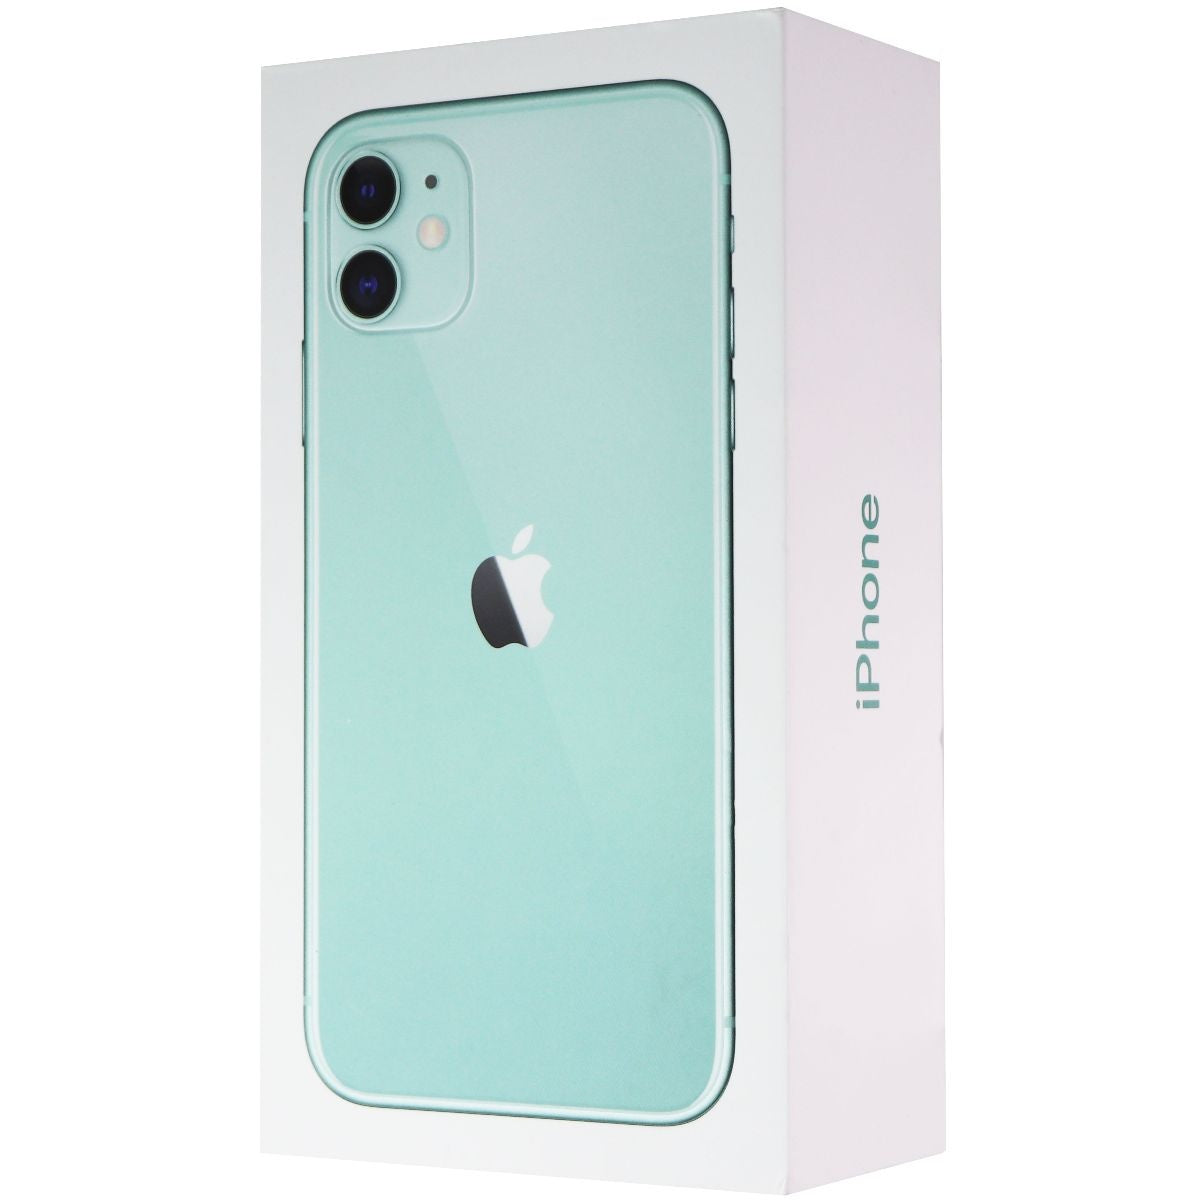 Apple iPhone 11 RETAIL BOX - 64GB / Green - NO DEVICE Cell Phone - Other Accessories Apple    - Simple Cell Bulk Wholesale Pricing - USA Seller